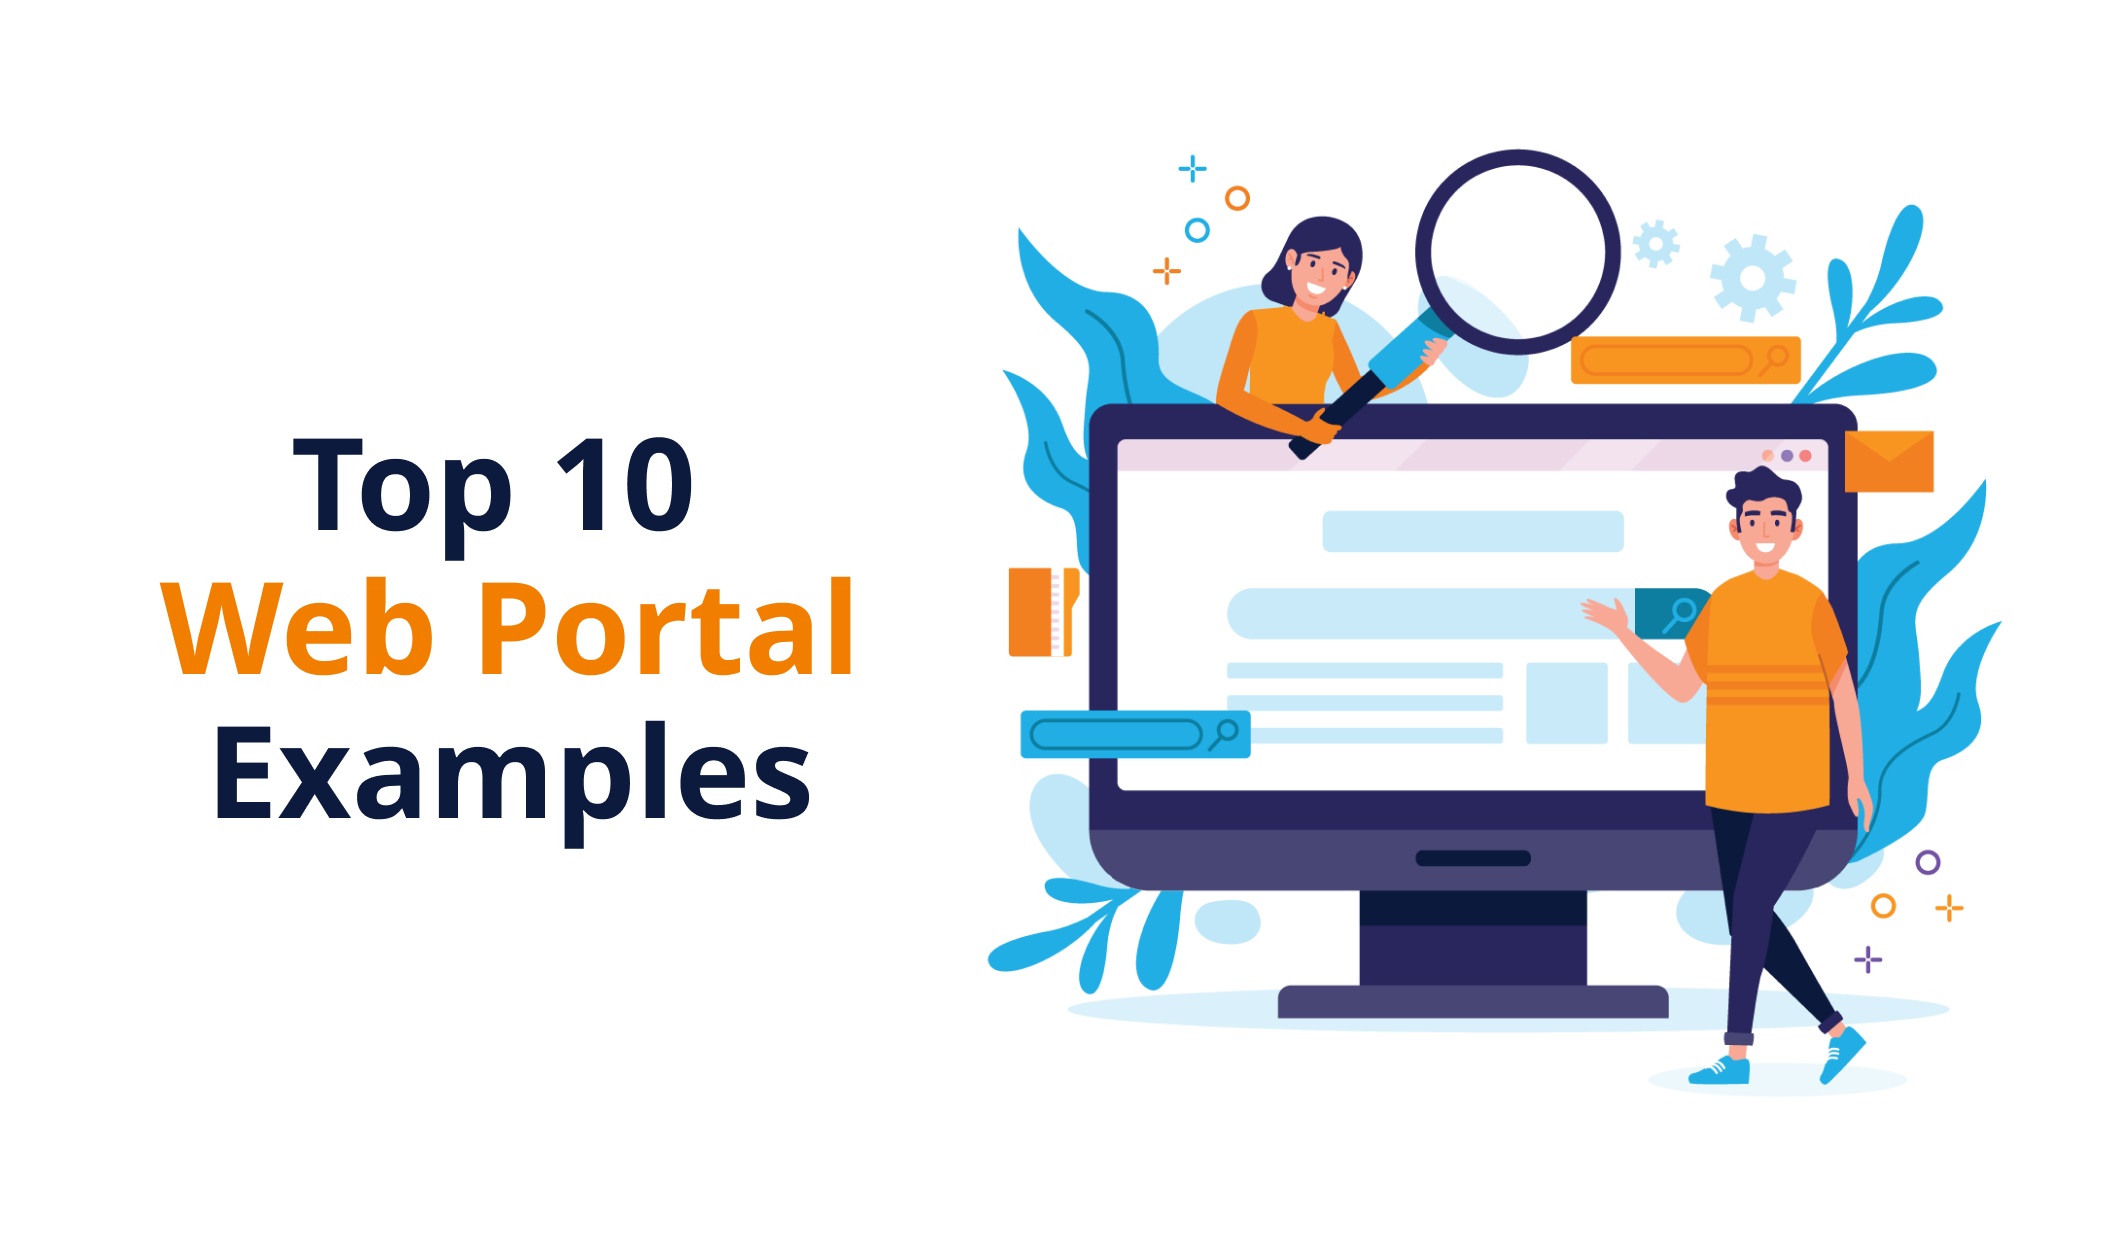 Top 10 Web Portal Examples You Must Know for the Growth of Your Business